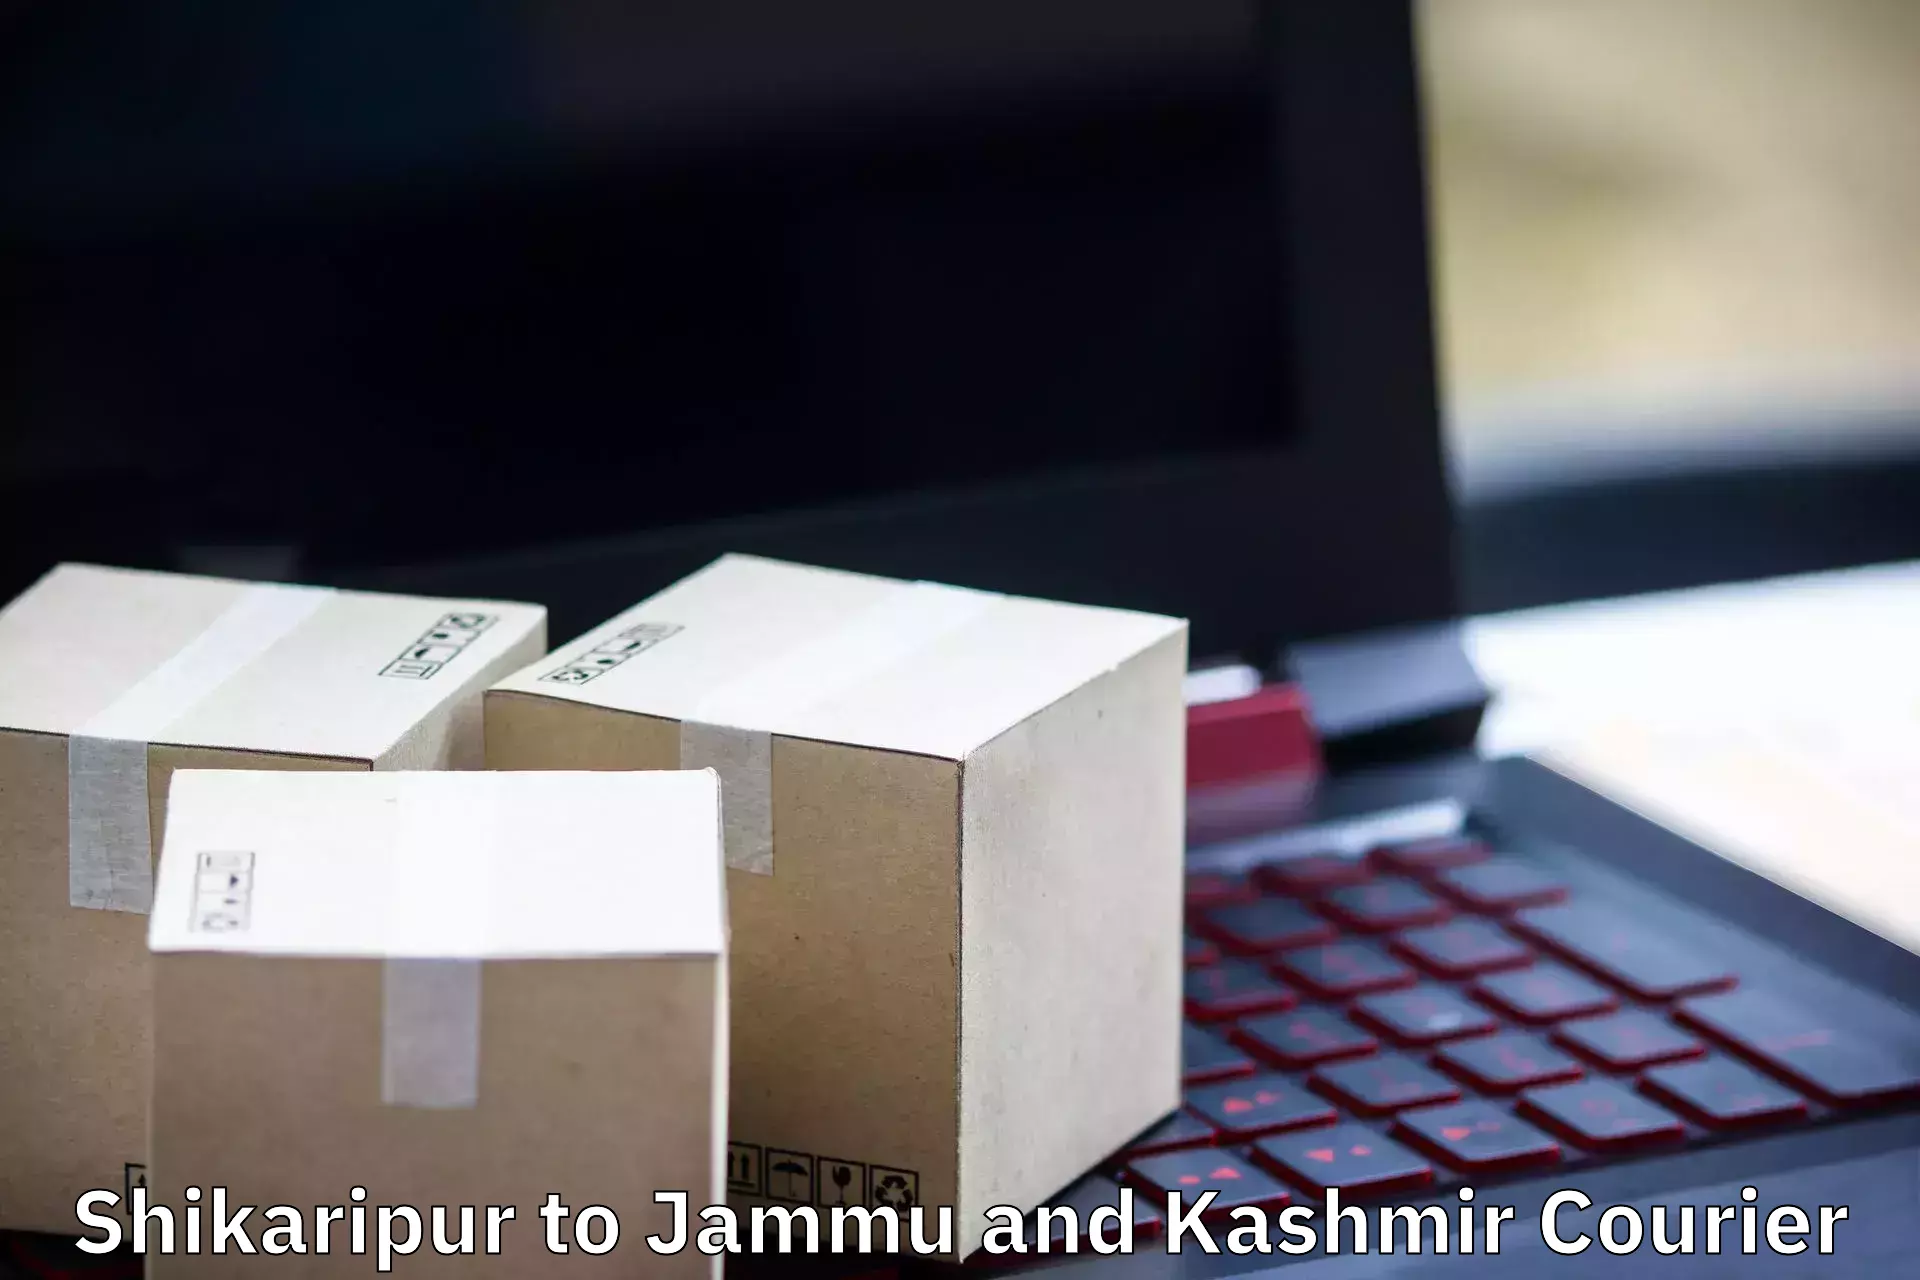 Professional relocation services Shikaripur to Baramulla